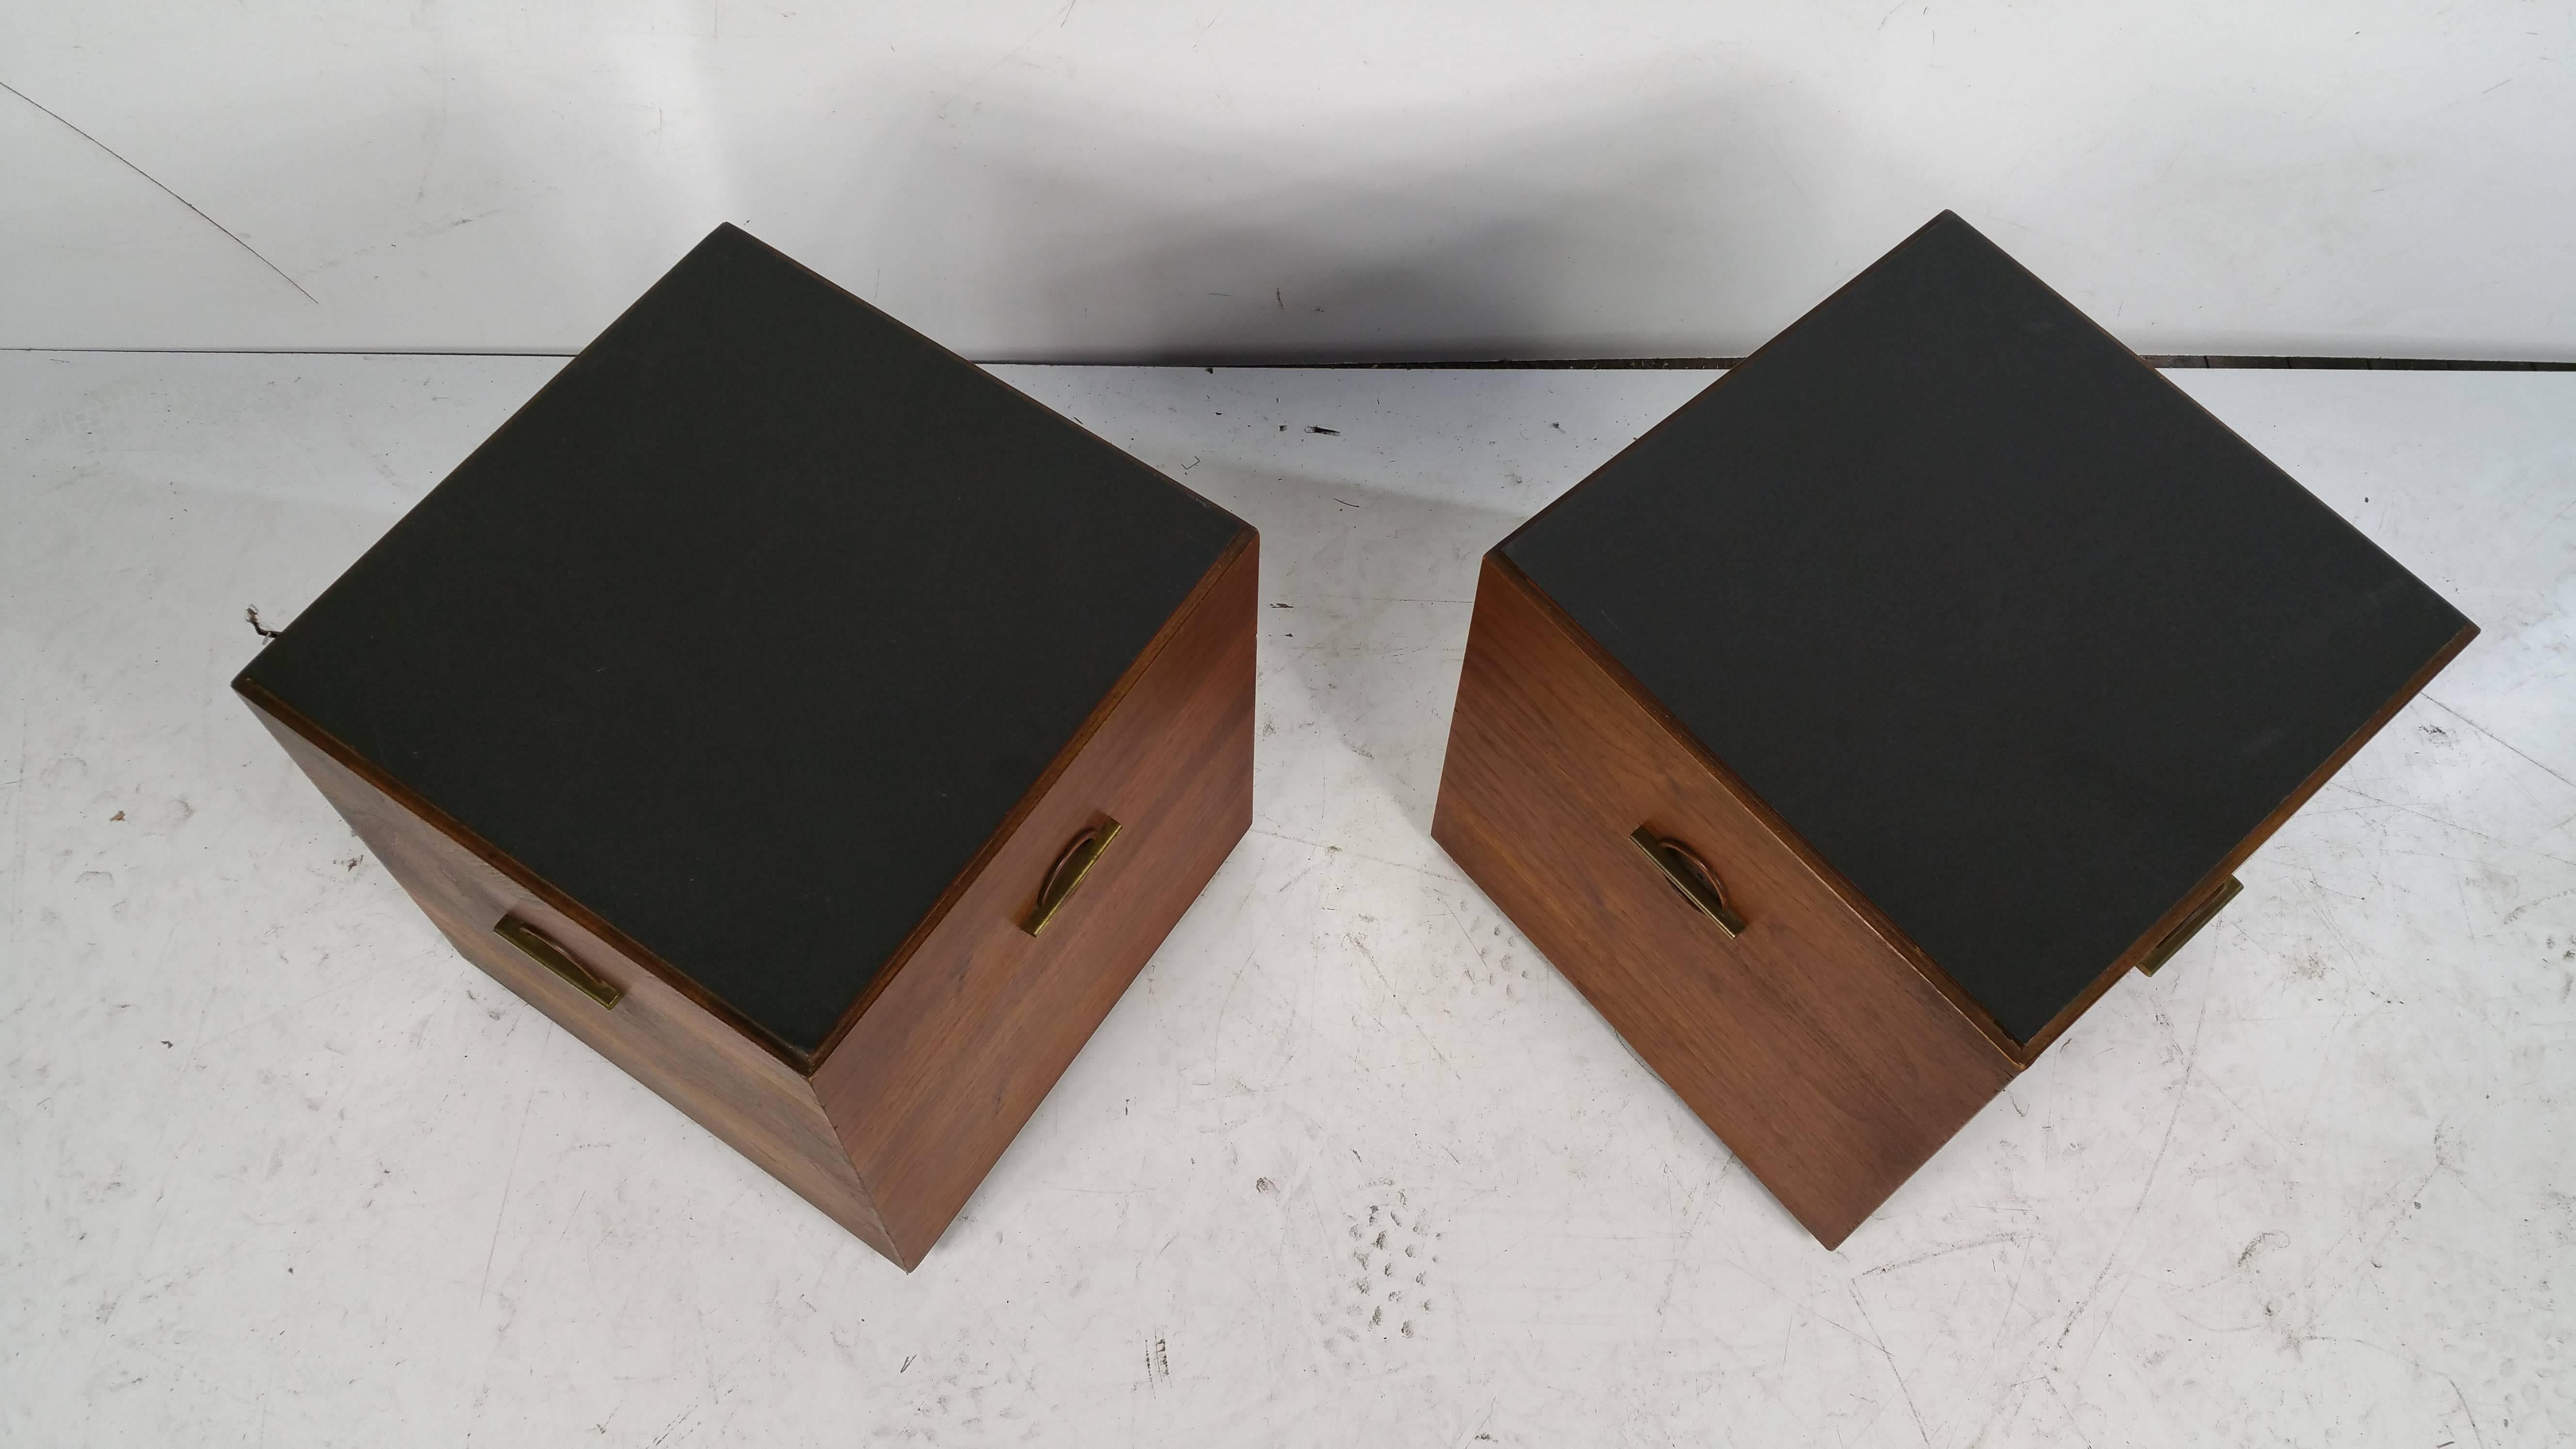 Mid-Century Modern Midcentury Minimalist Cube Tables or Stands in Walnut and Brass by Lane For Sale